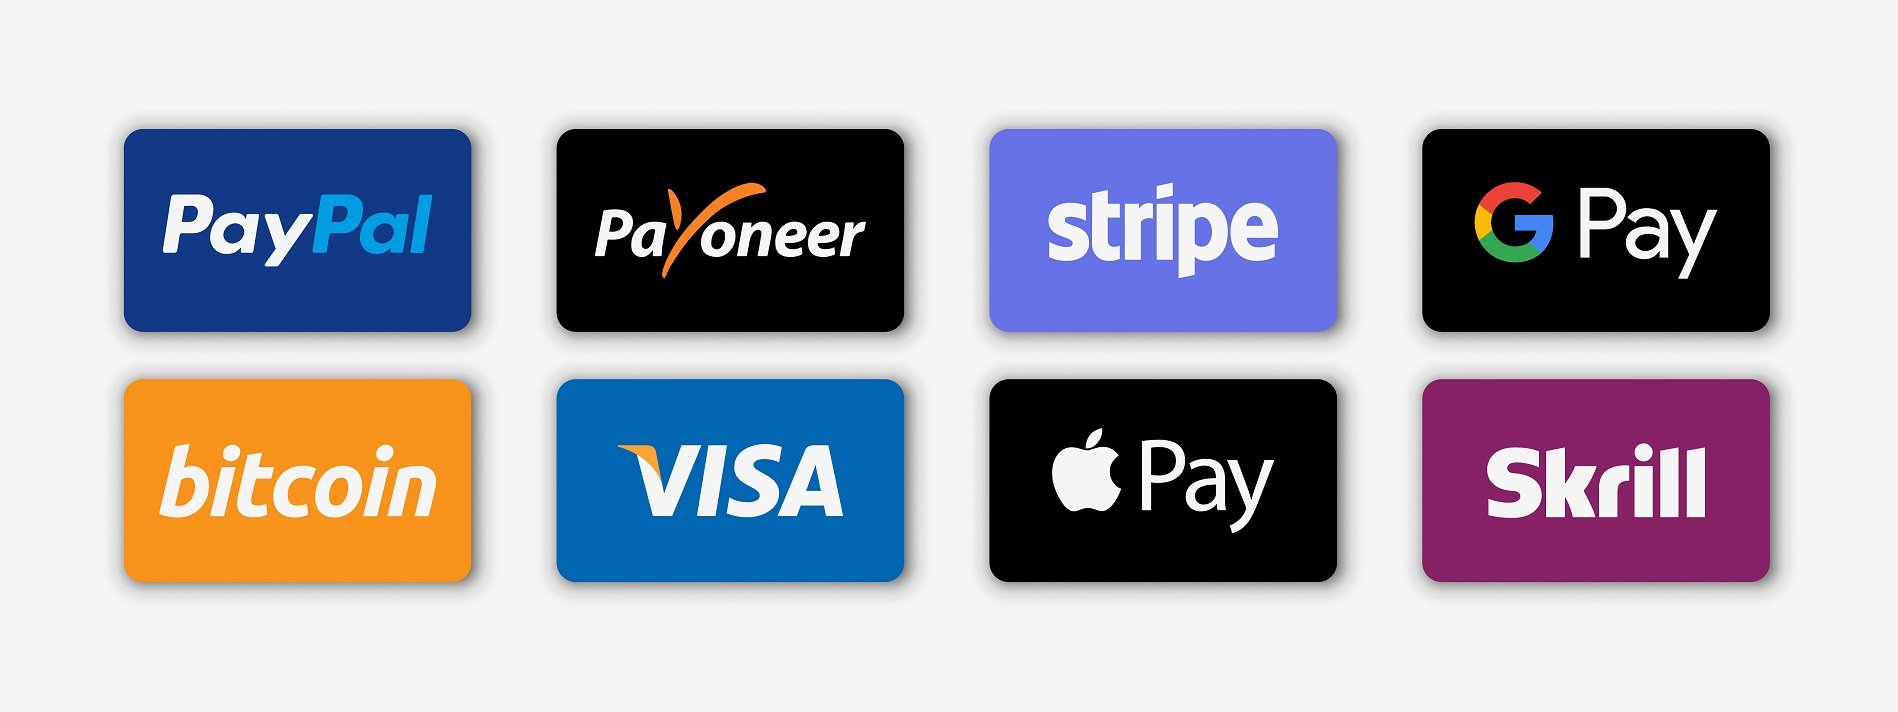 Paypal, payoneer, visa, discover, mastercard, skrill, apple pay, google pay, american express - most popular realistic payment logotype. Payment icon set